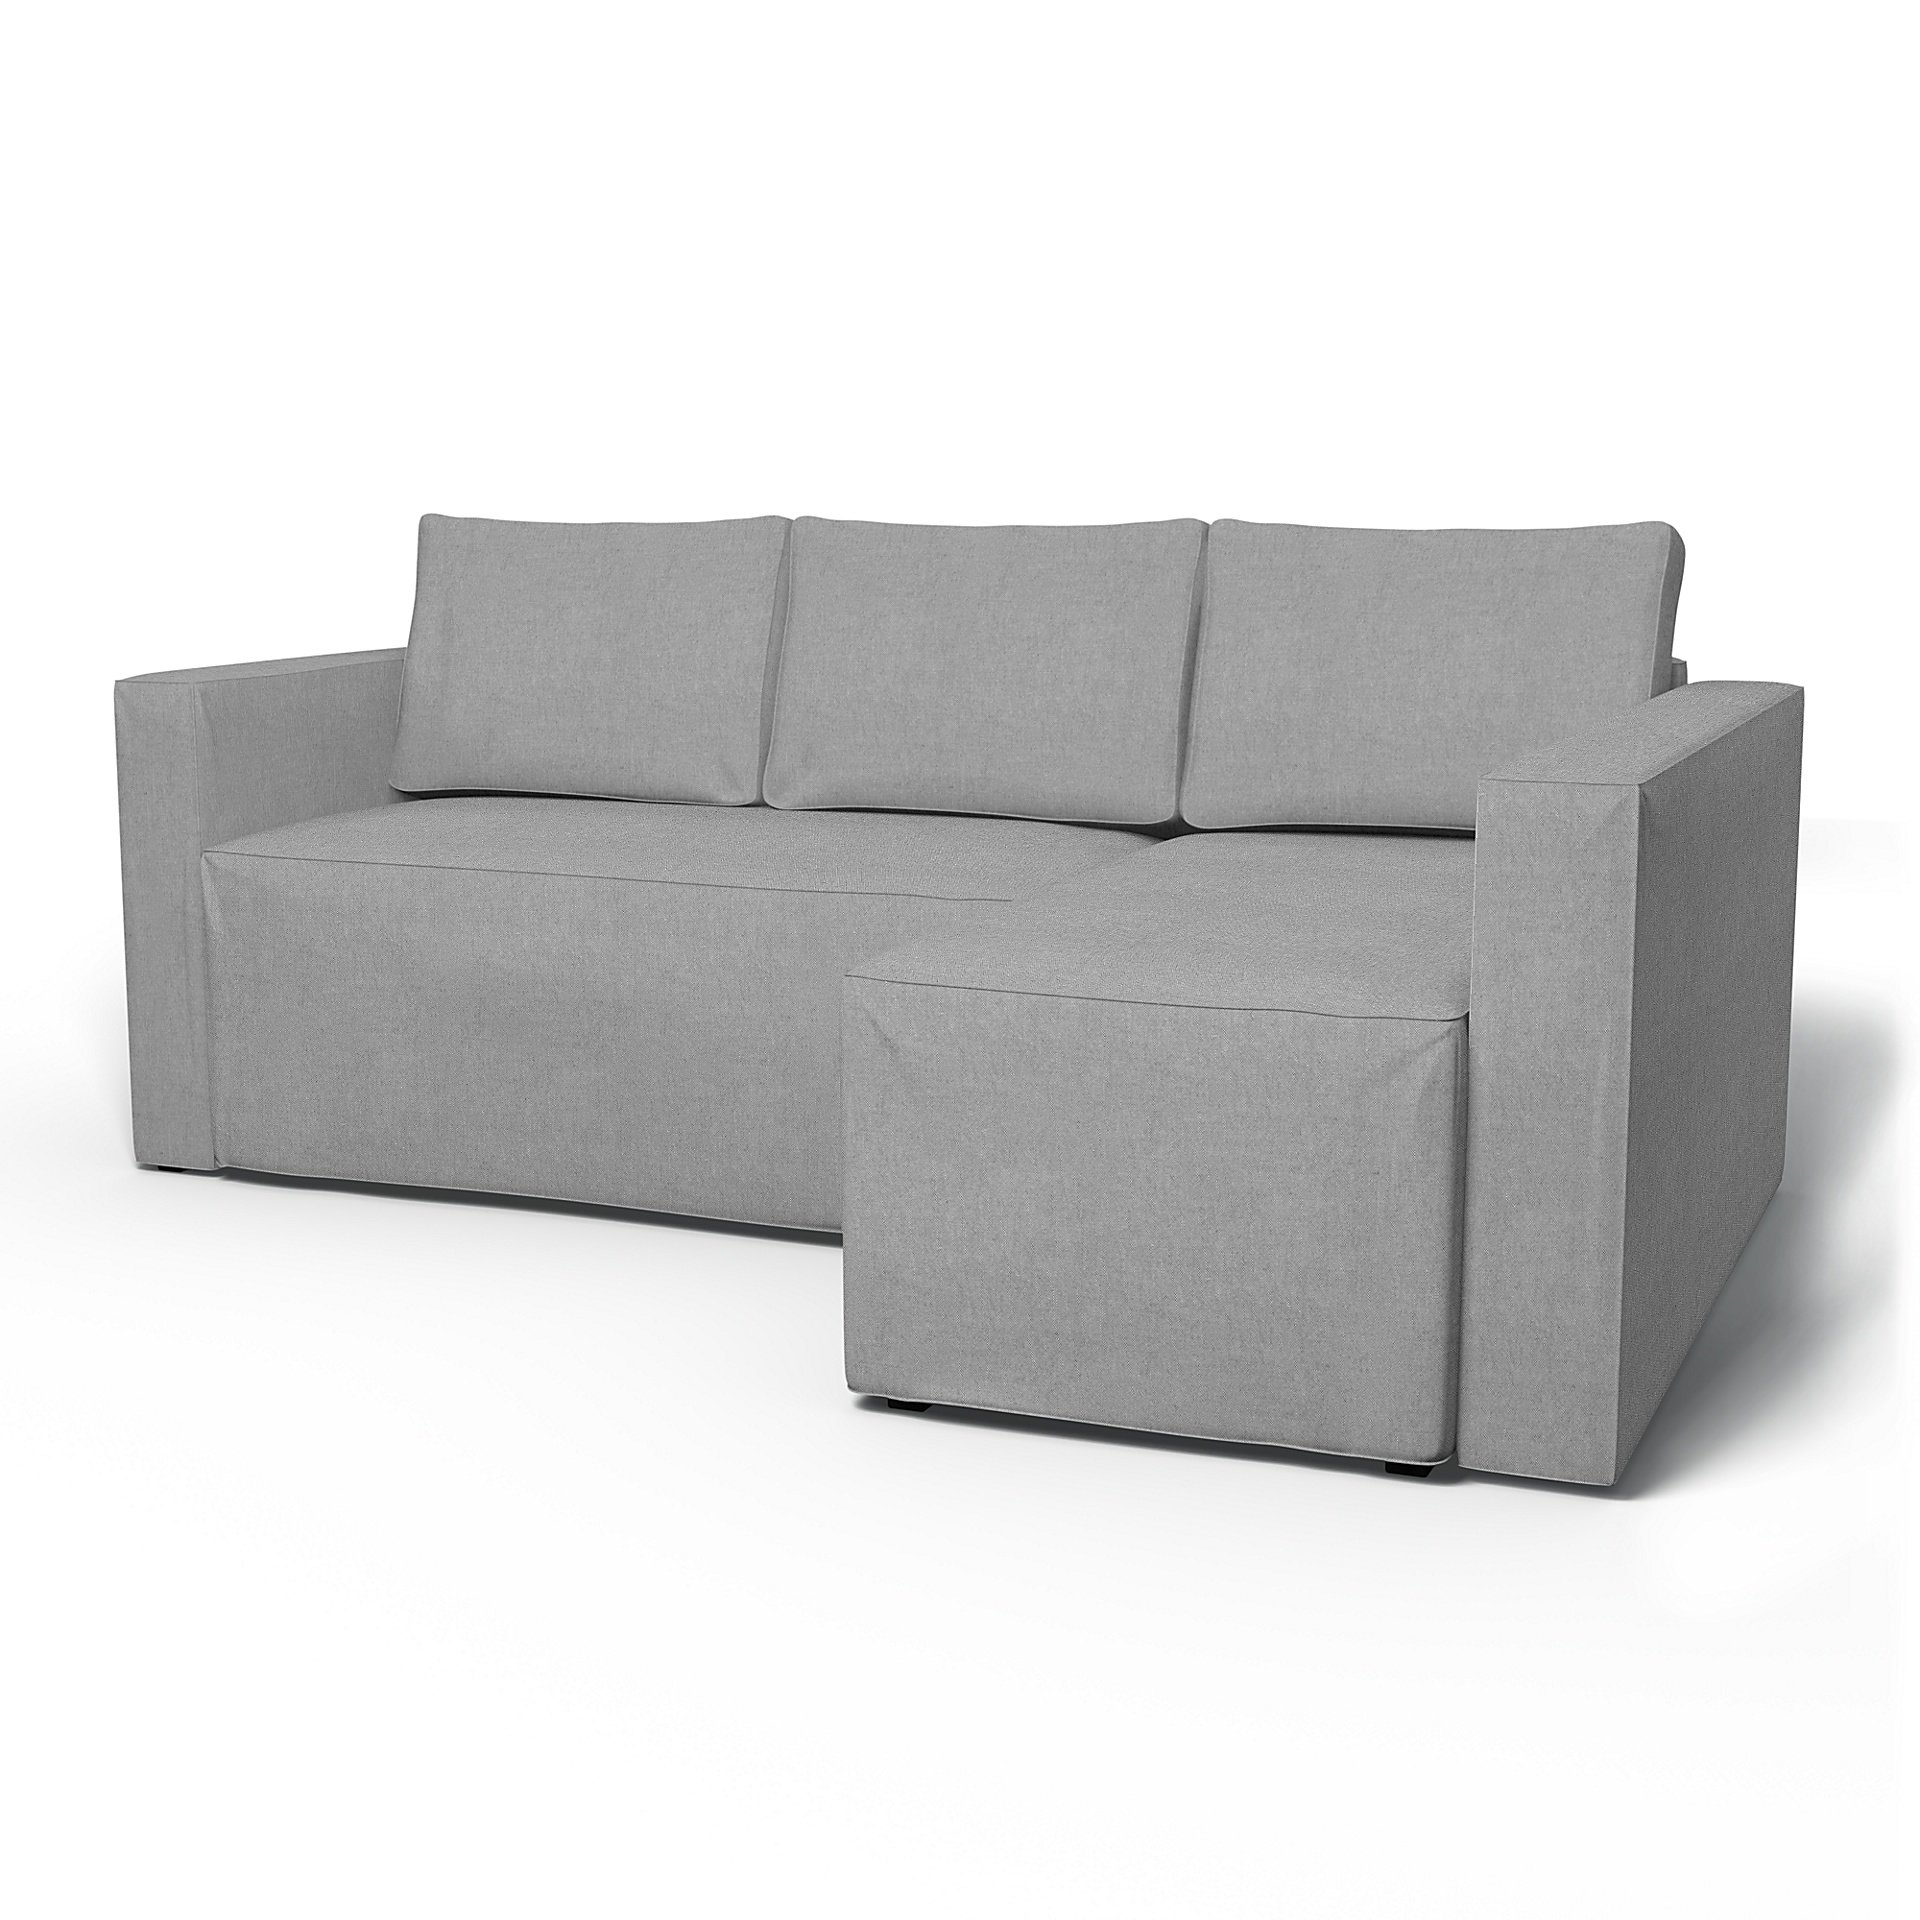 IKEA - Manstad Sofa Bed with Right Chaise Cover, Graphite, Linen - Bemz